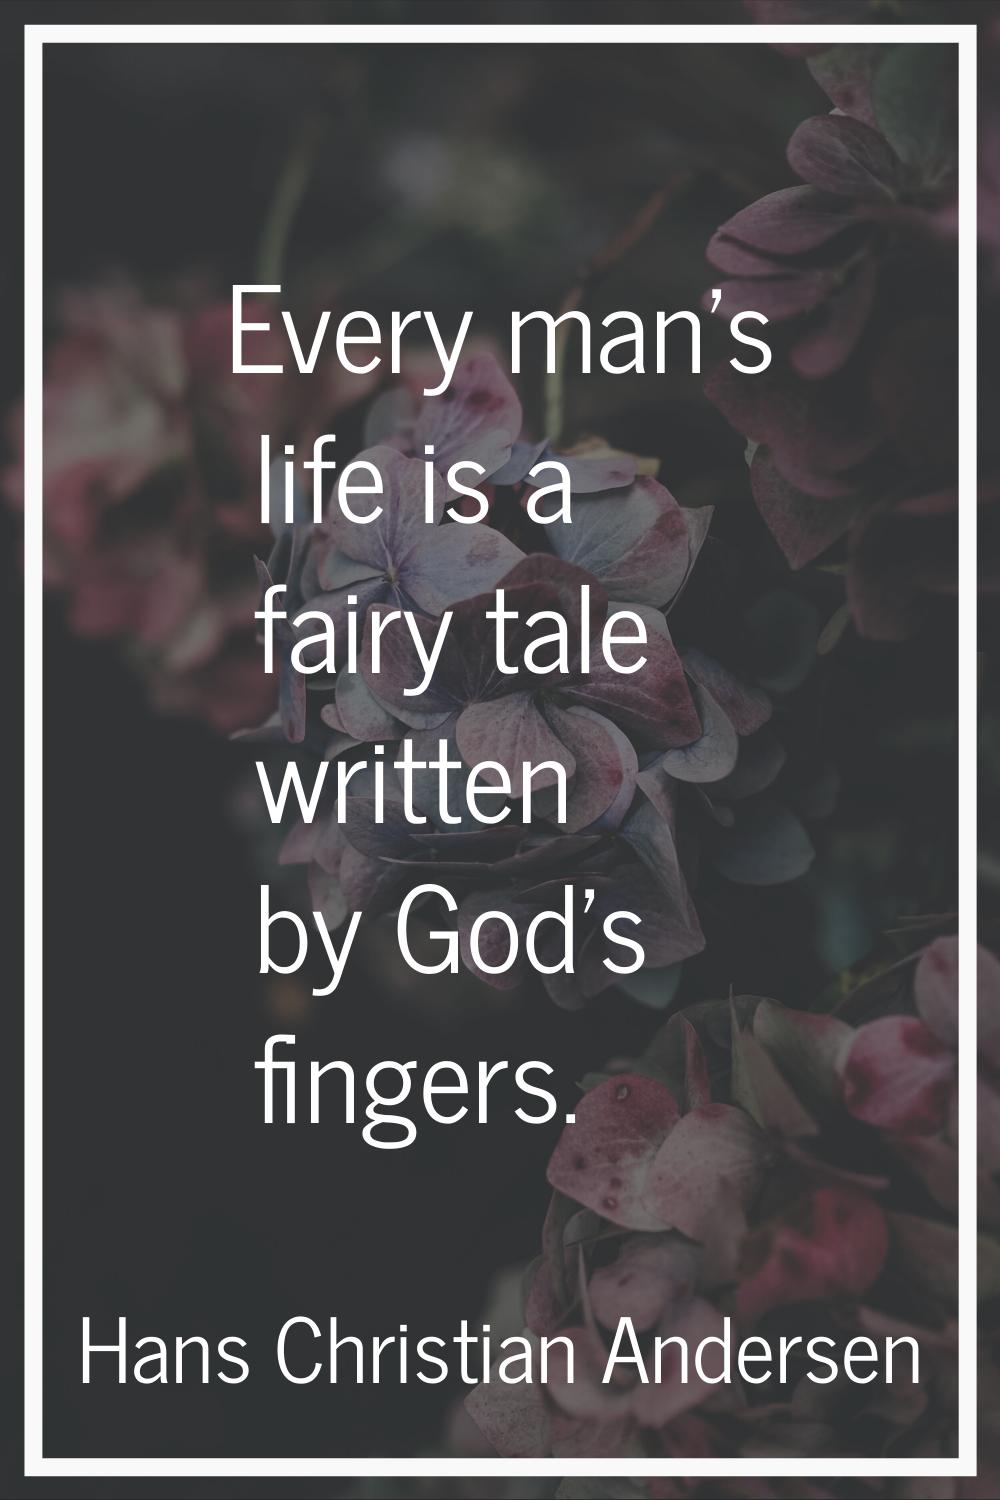 Every man's life is a fairy tale written by God's fingers.